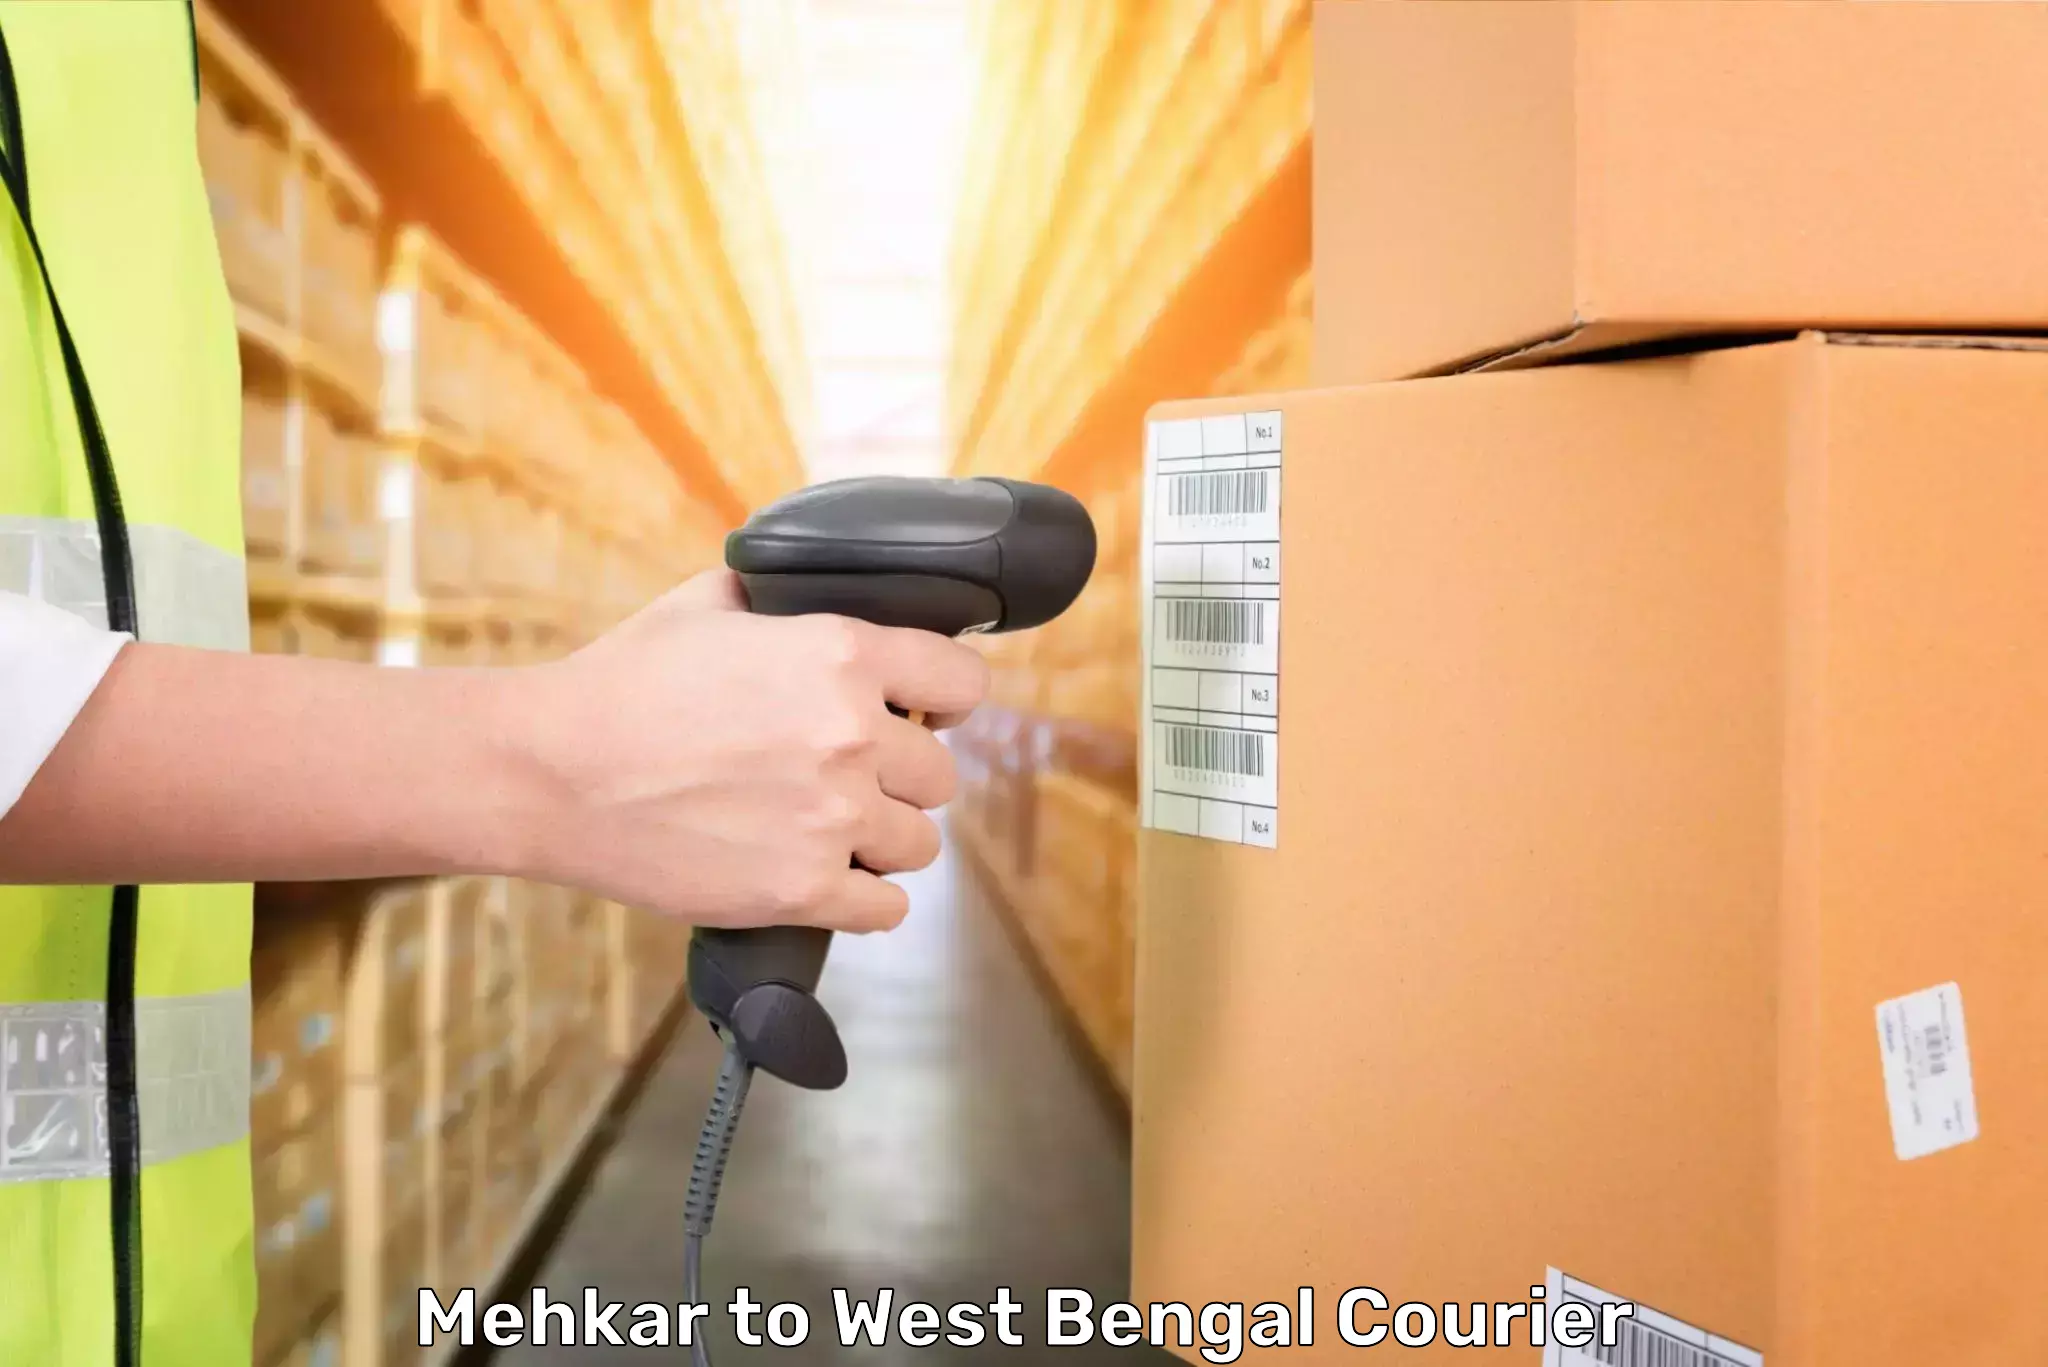 Baggage transport network Mehkar to West Bengal